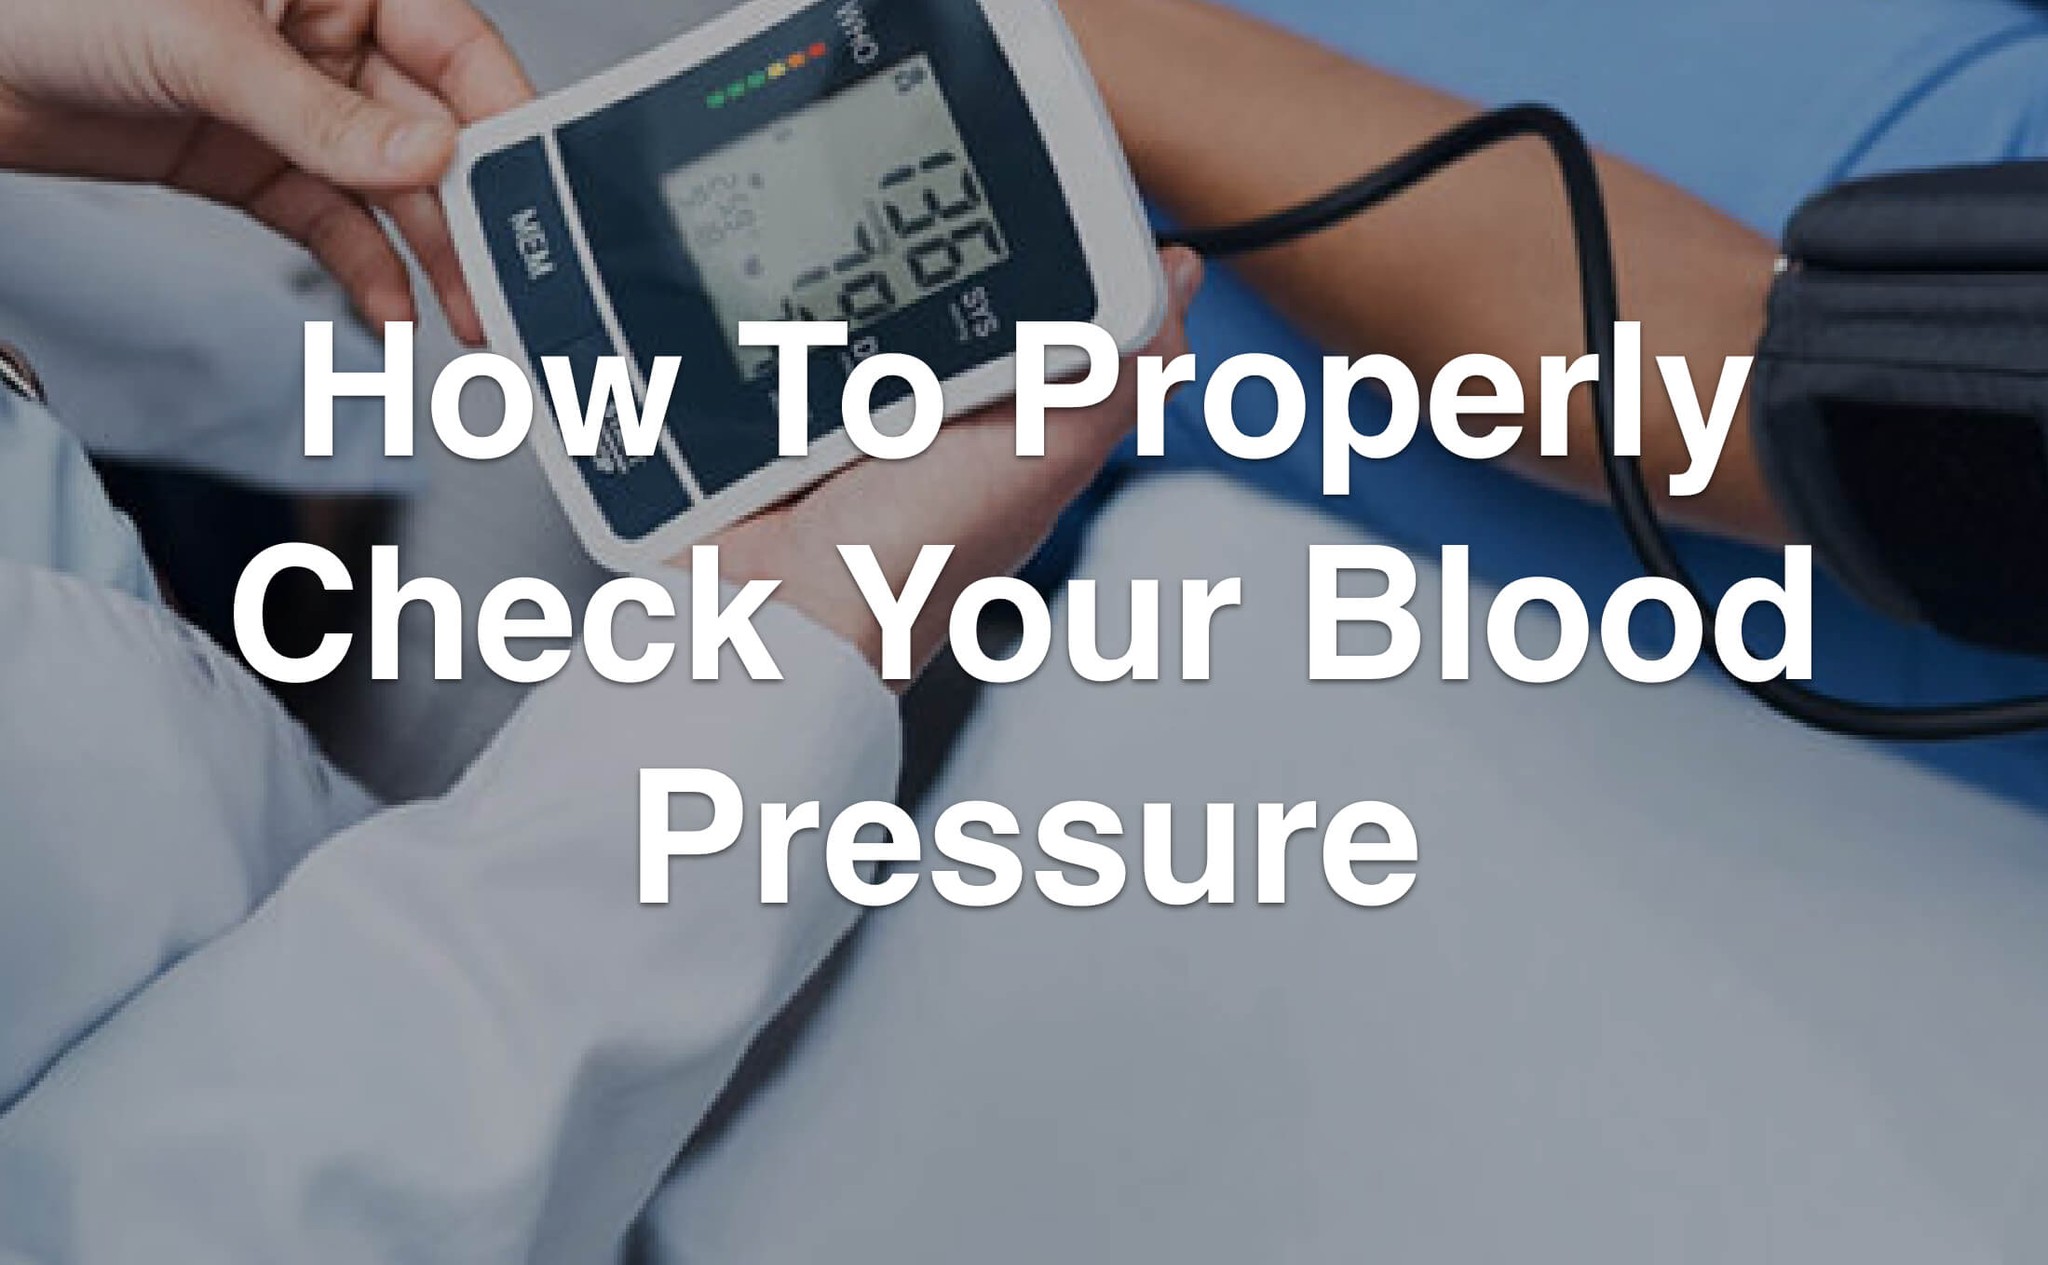 HOW TO PROPERLY CHECK YOUR BLOOD PRESSURE